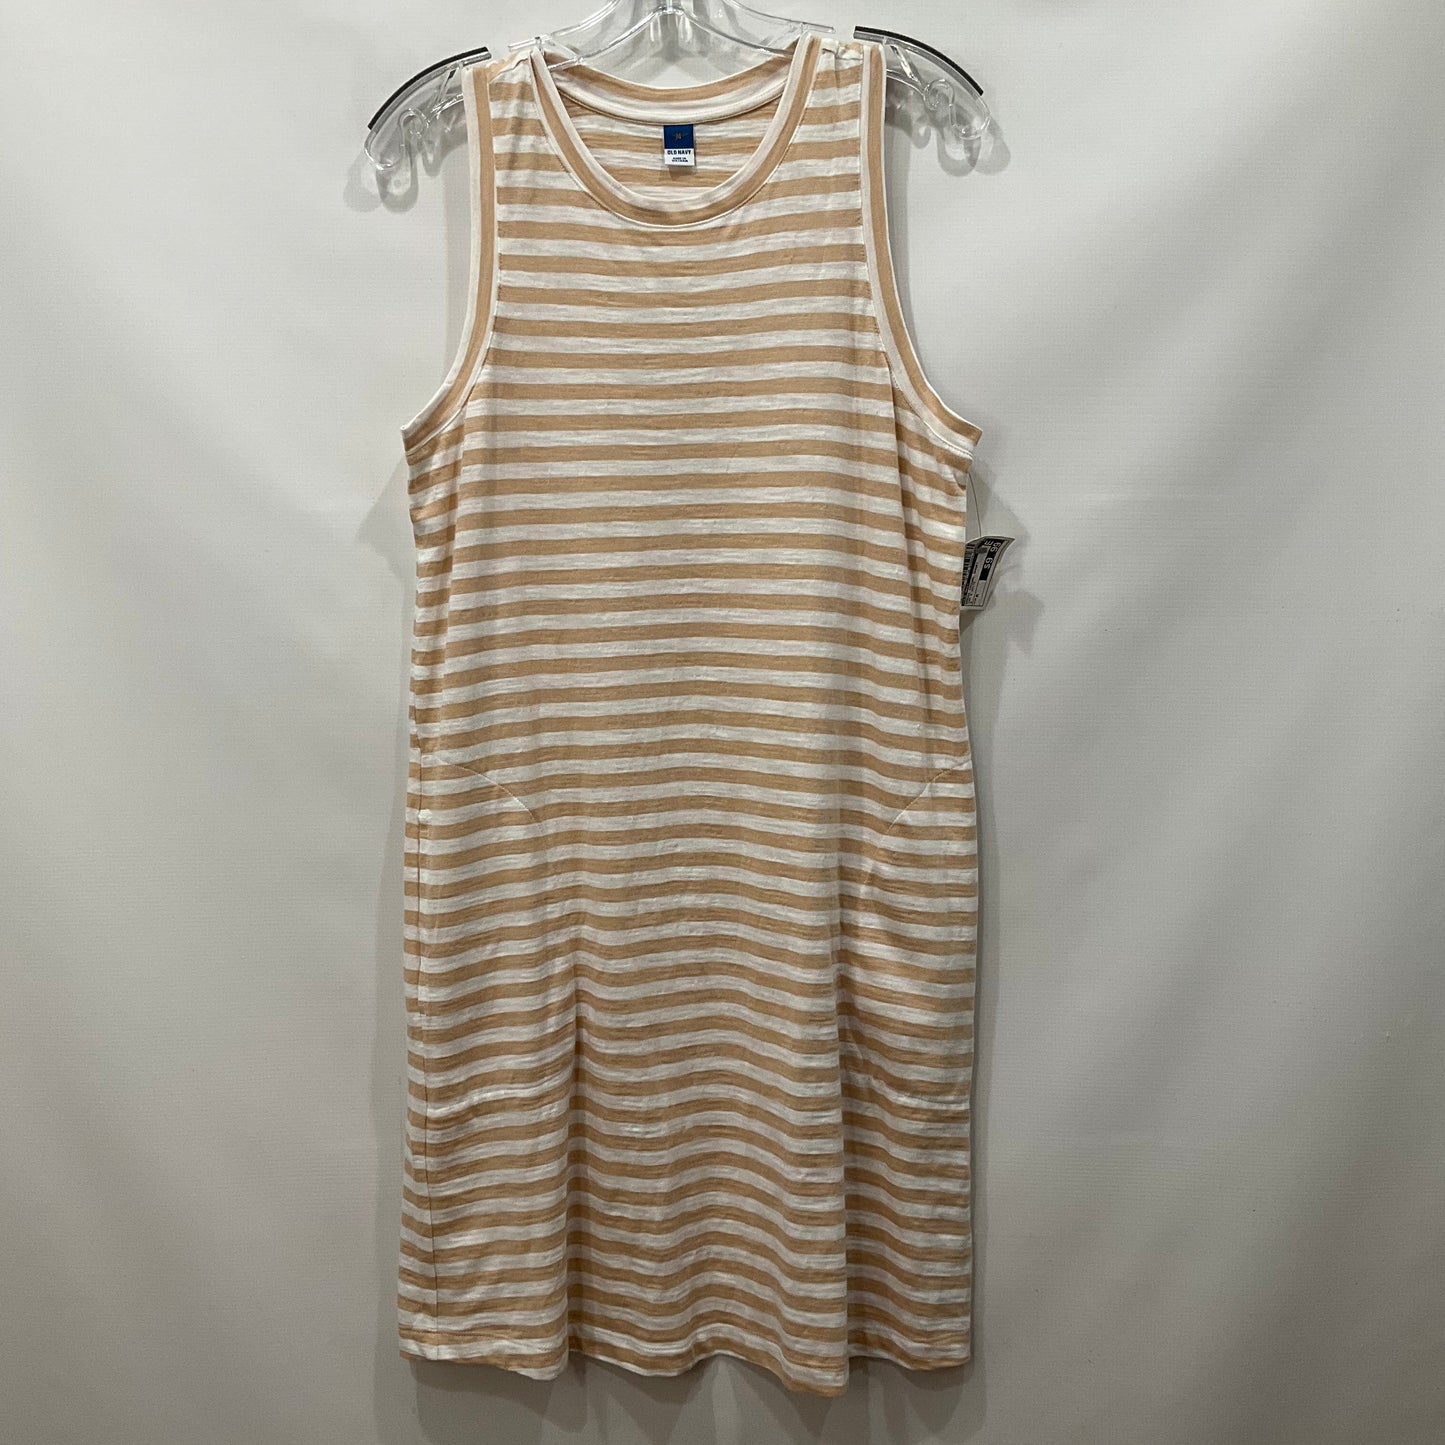 Tan & White Dress Casual Short Old Navy, Size M